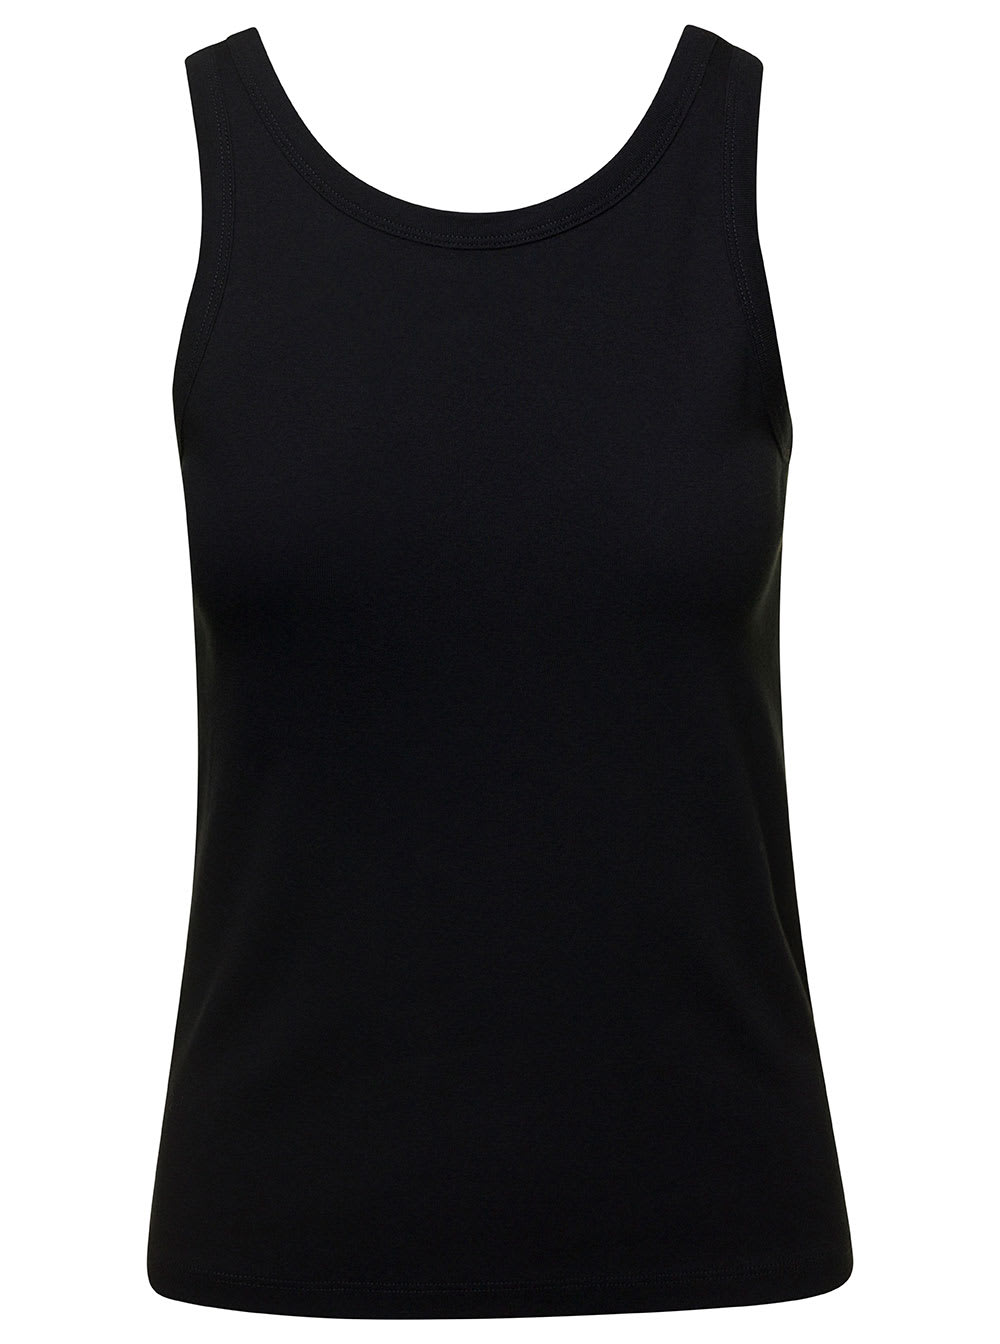 THE ROW FRANKIE BLACK TANK TOP IN COTTON WOMAN